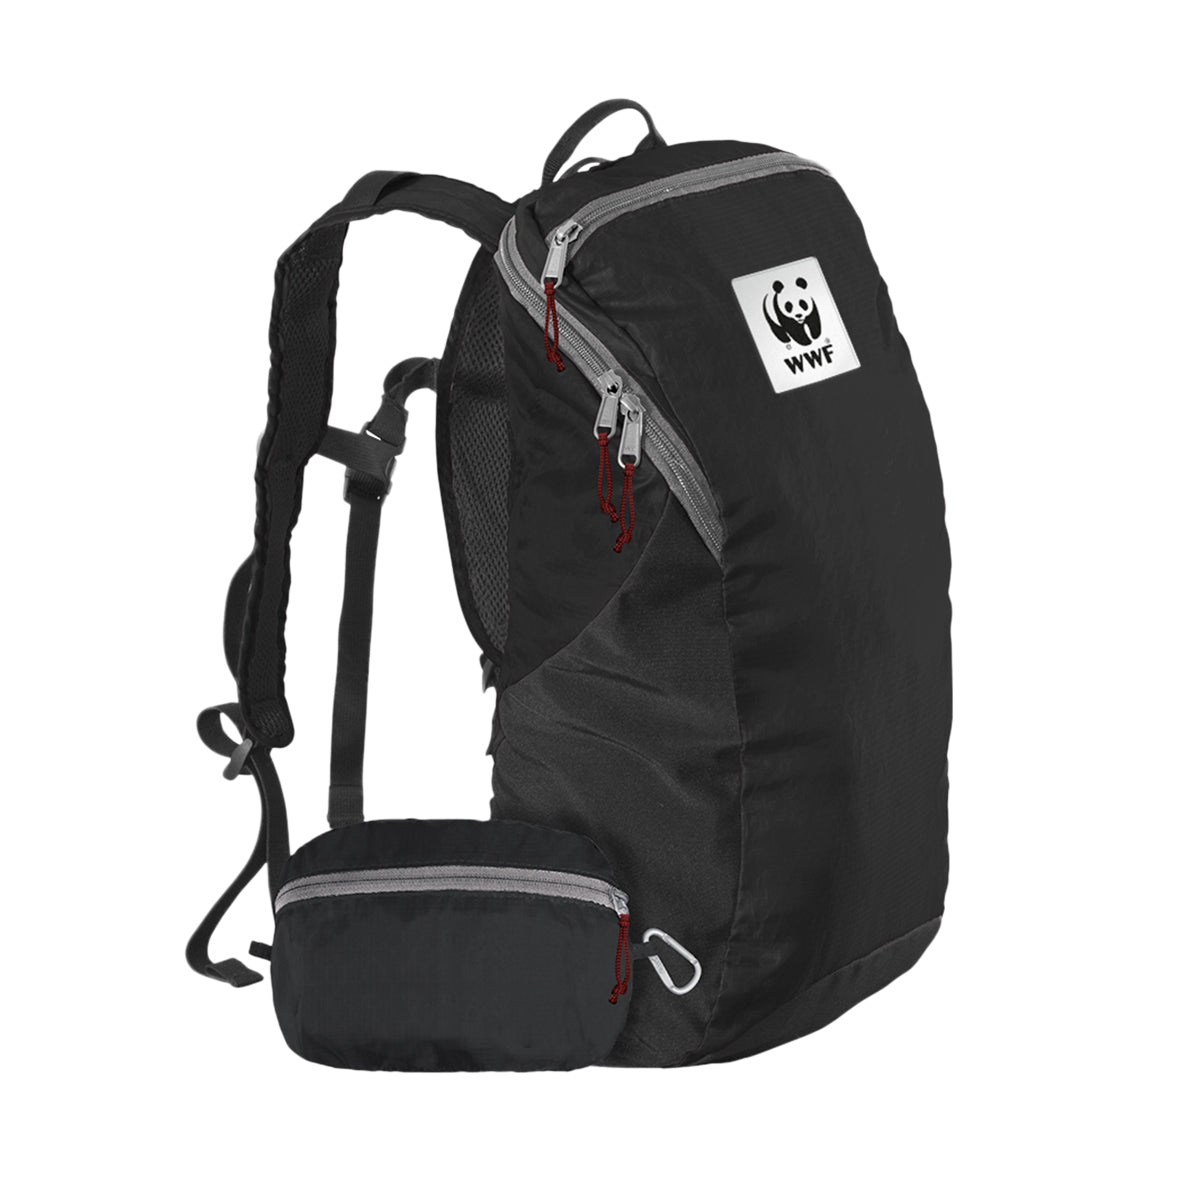 A photo of the ChicoBag travel backpack featuring the WWF logo